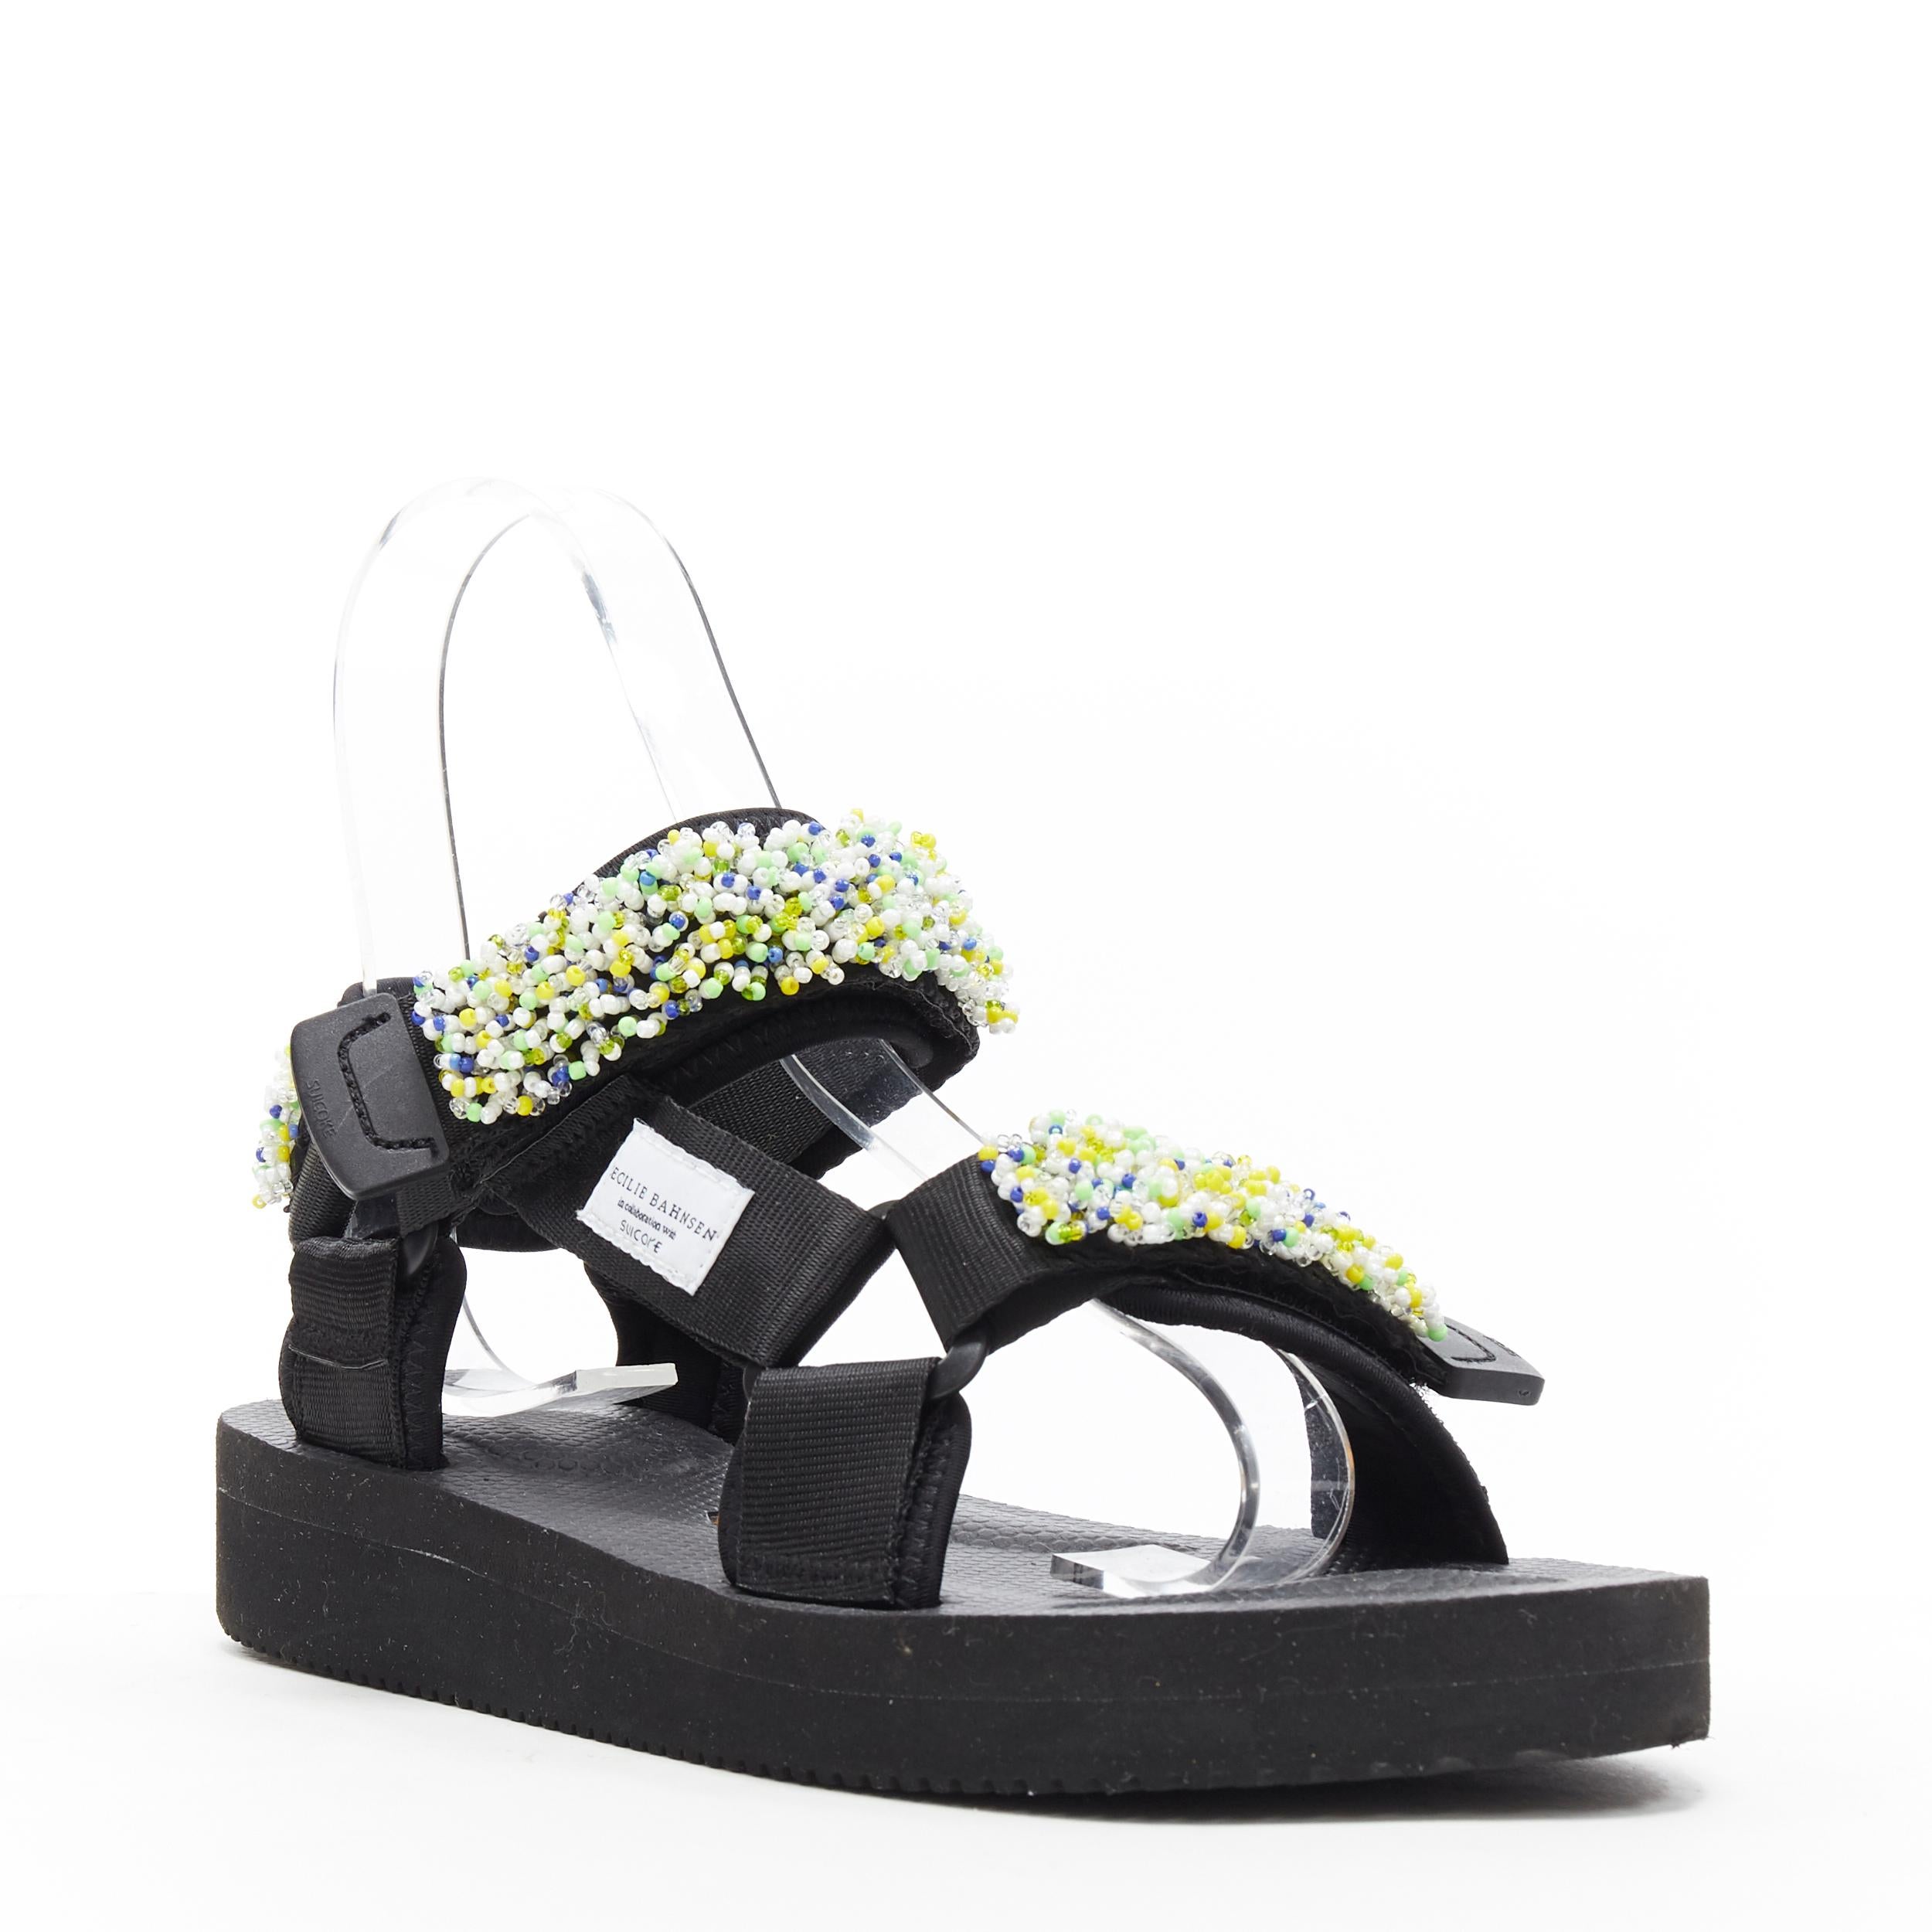 new CECILIE BAHNSEN SUICOKE Maria beaded sports strap vibran sole sandals EU37
Brand: Cecilie Bahnsen
Designer: Suicoke
Model Name / Style: Strappy sandals
Material: Rubber
Color: Black
Pattern: Solid
Extra Detail: In collaboraction with Suicoke.